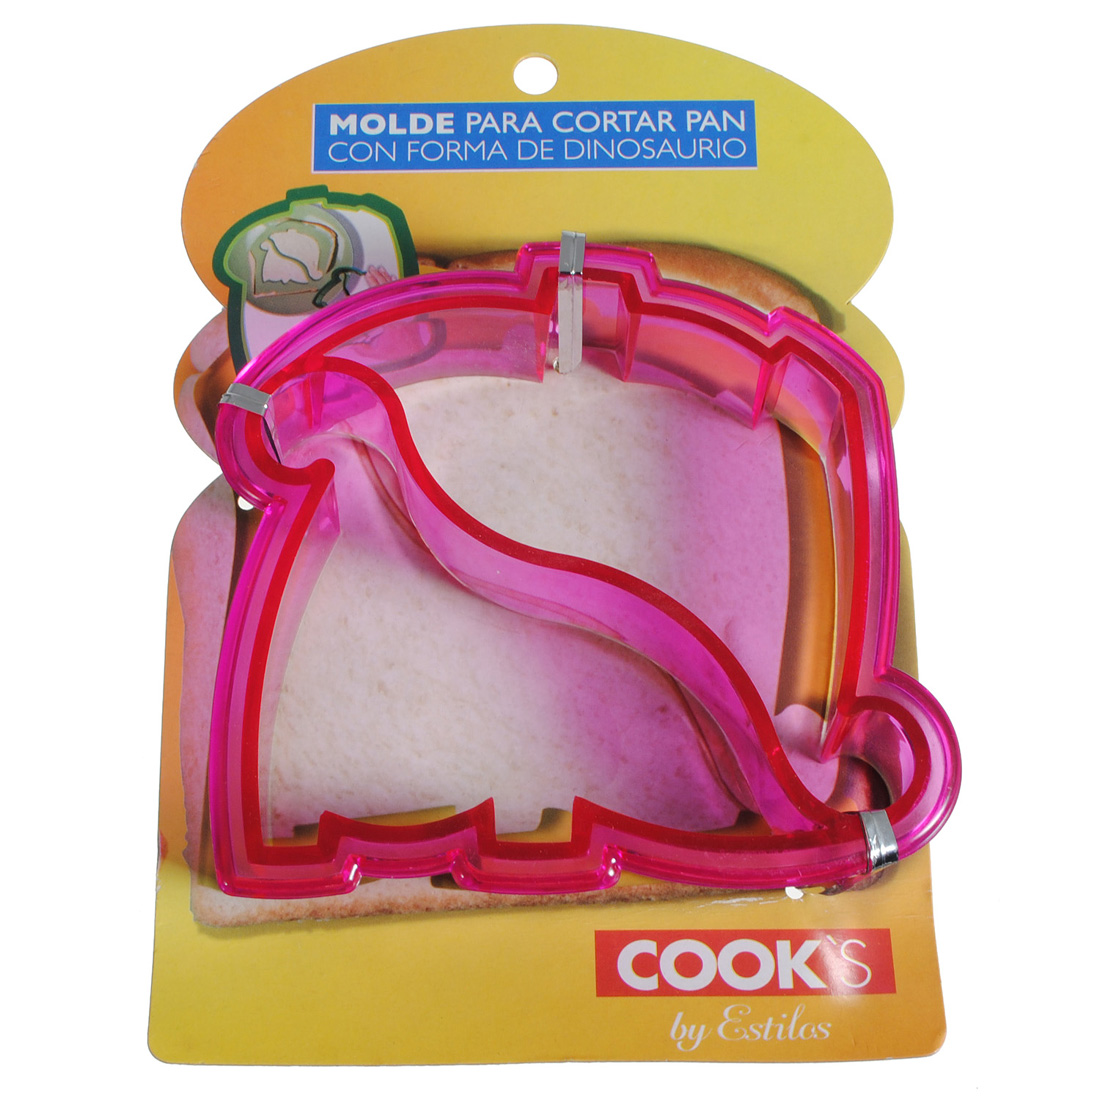 Kids-Lunch-Sandwich-Toast-Cookies-Bread-Cake-Biscuit-Food-Cutter-Dinosaur-Mould-55969-8